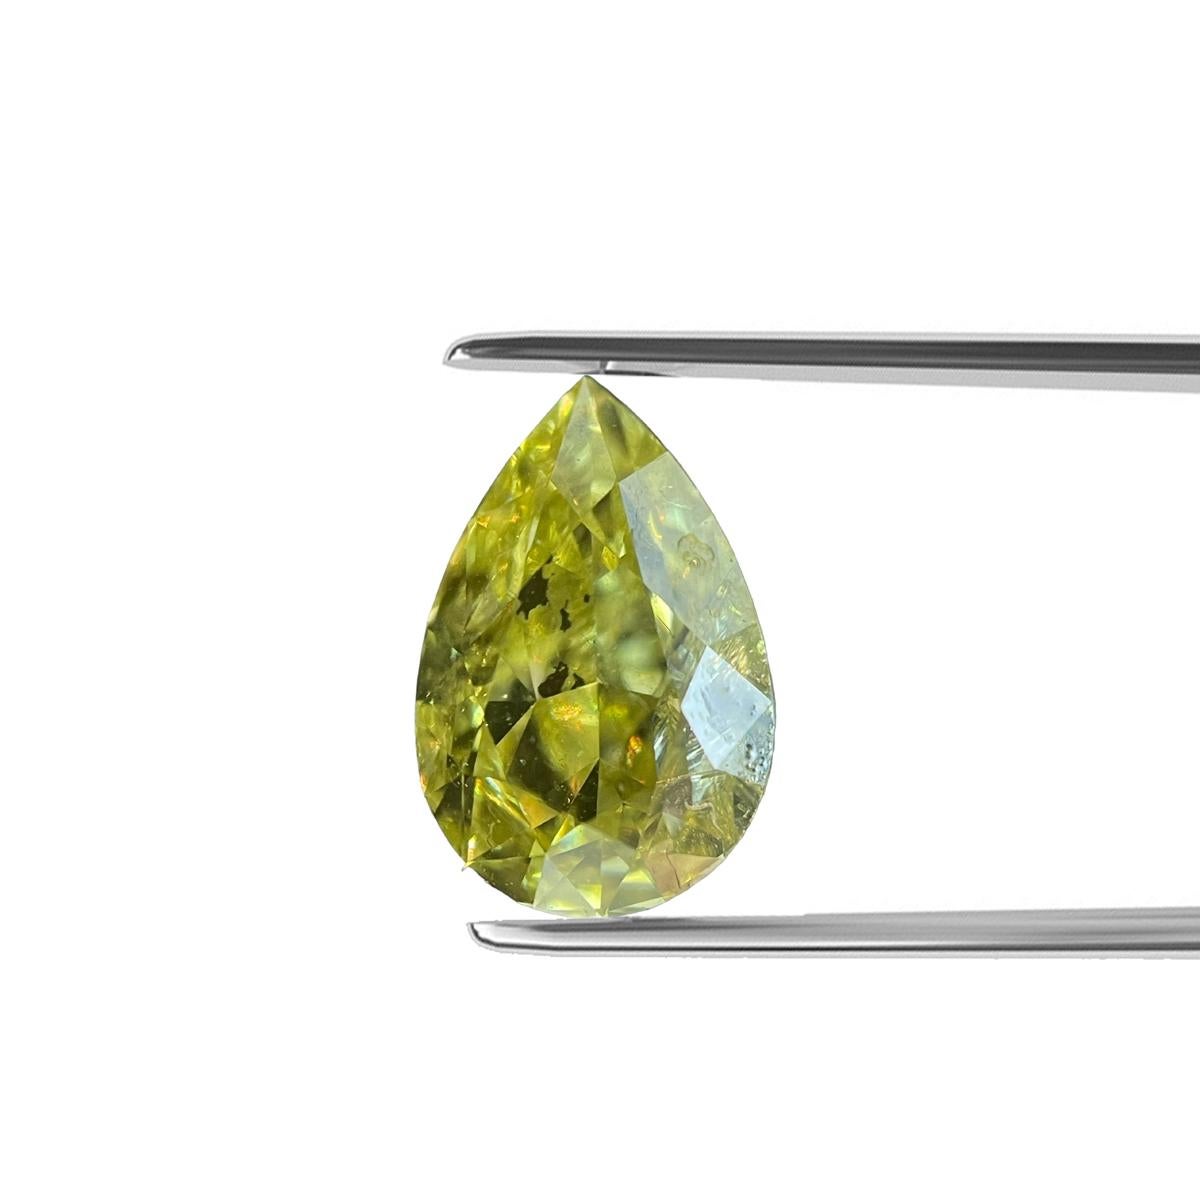 ITEM DESCRIPTION

ID #:	NY56549
Stone Shape: PEAR  MODIFIED BRILLIANT
Diamond Weight: 1.43ct
Color: Fancy Intense Yellow
Cut:	Excellent
Measurements: 8.76 x 5.84 x 3.91 mm
Symmetry: Excellent
Polish:	Excellent
Certifying Lab:	GIA
GIA Certificate #: